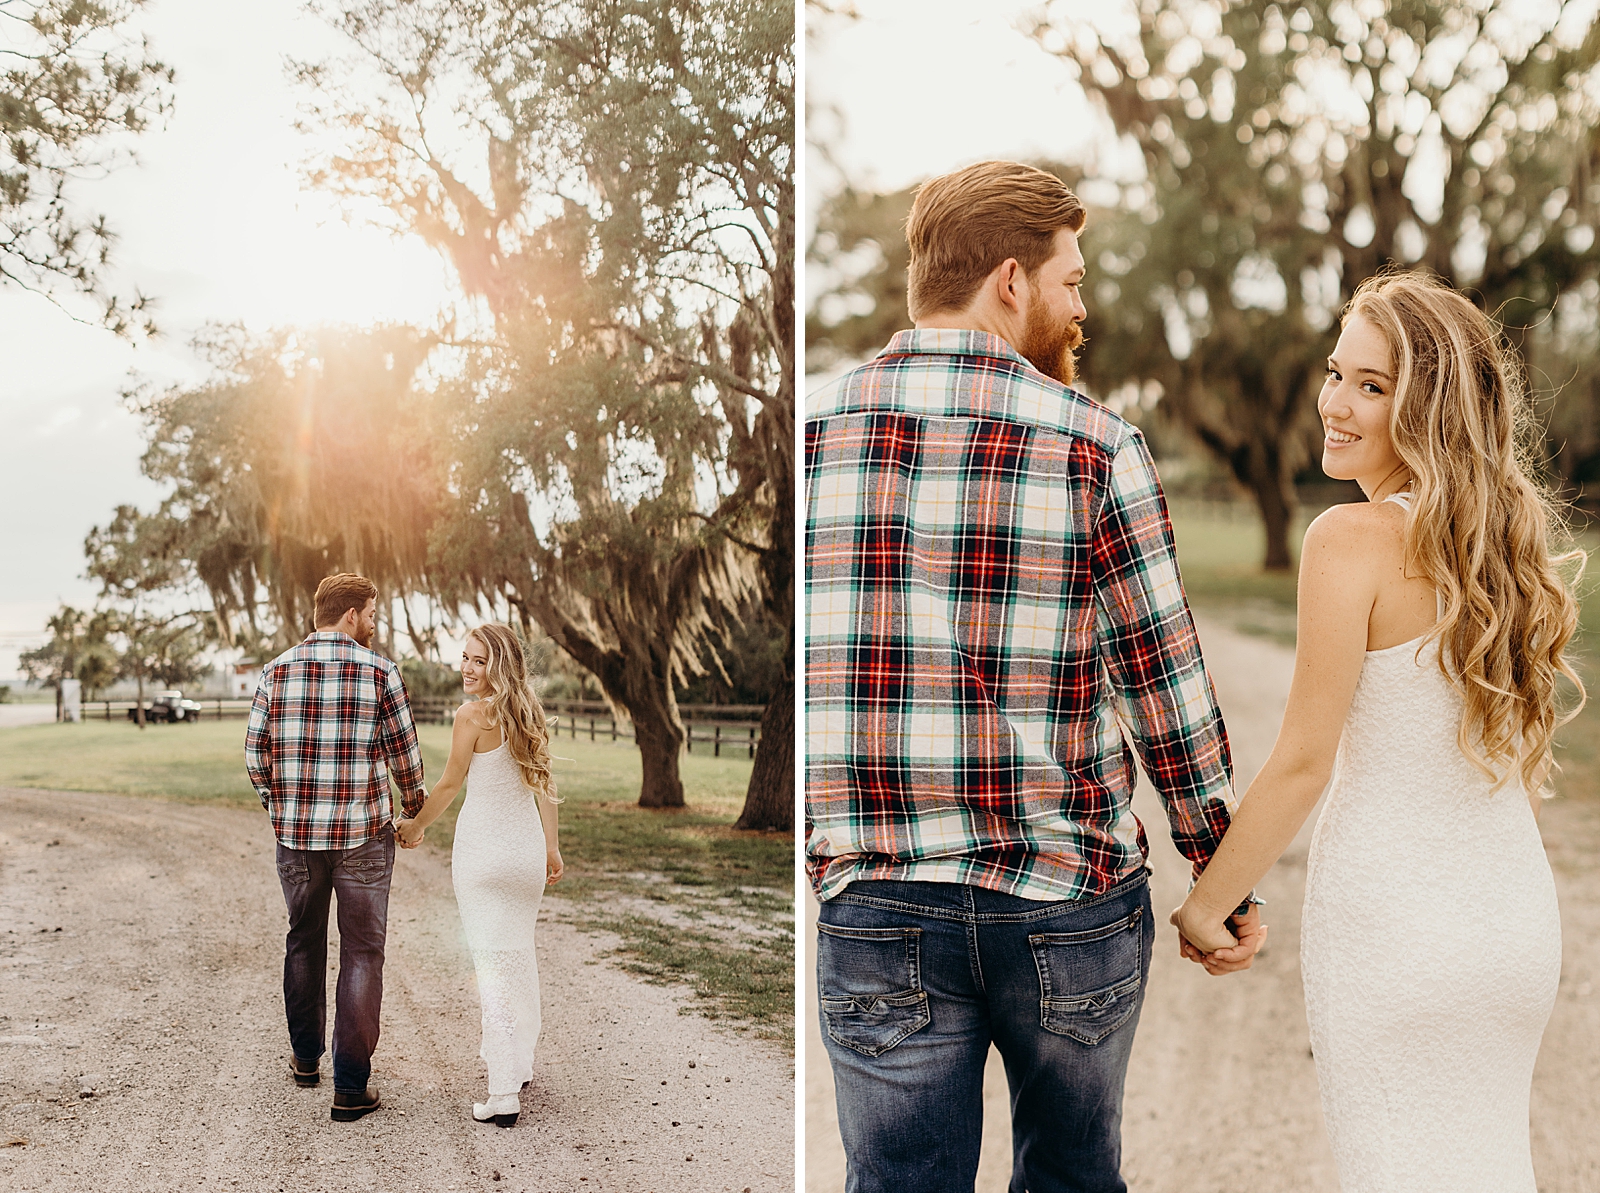 Couple holding hands and walking on dirt path path together